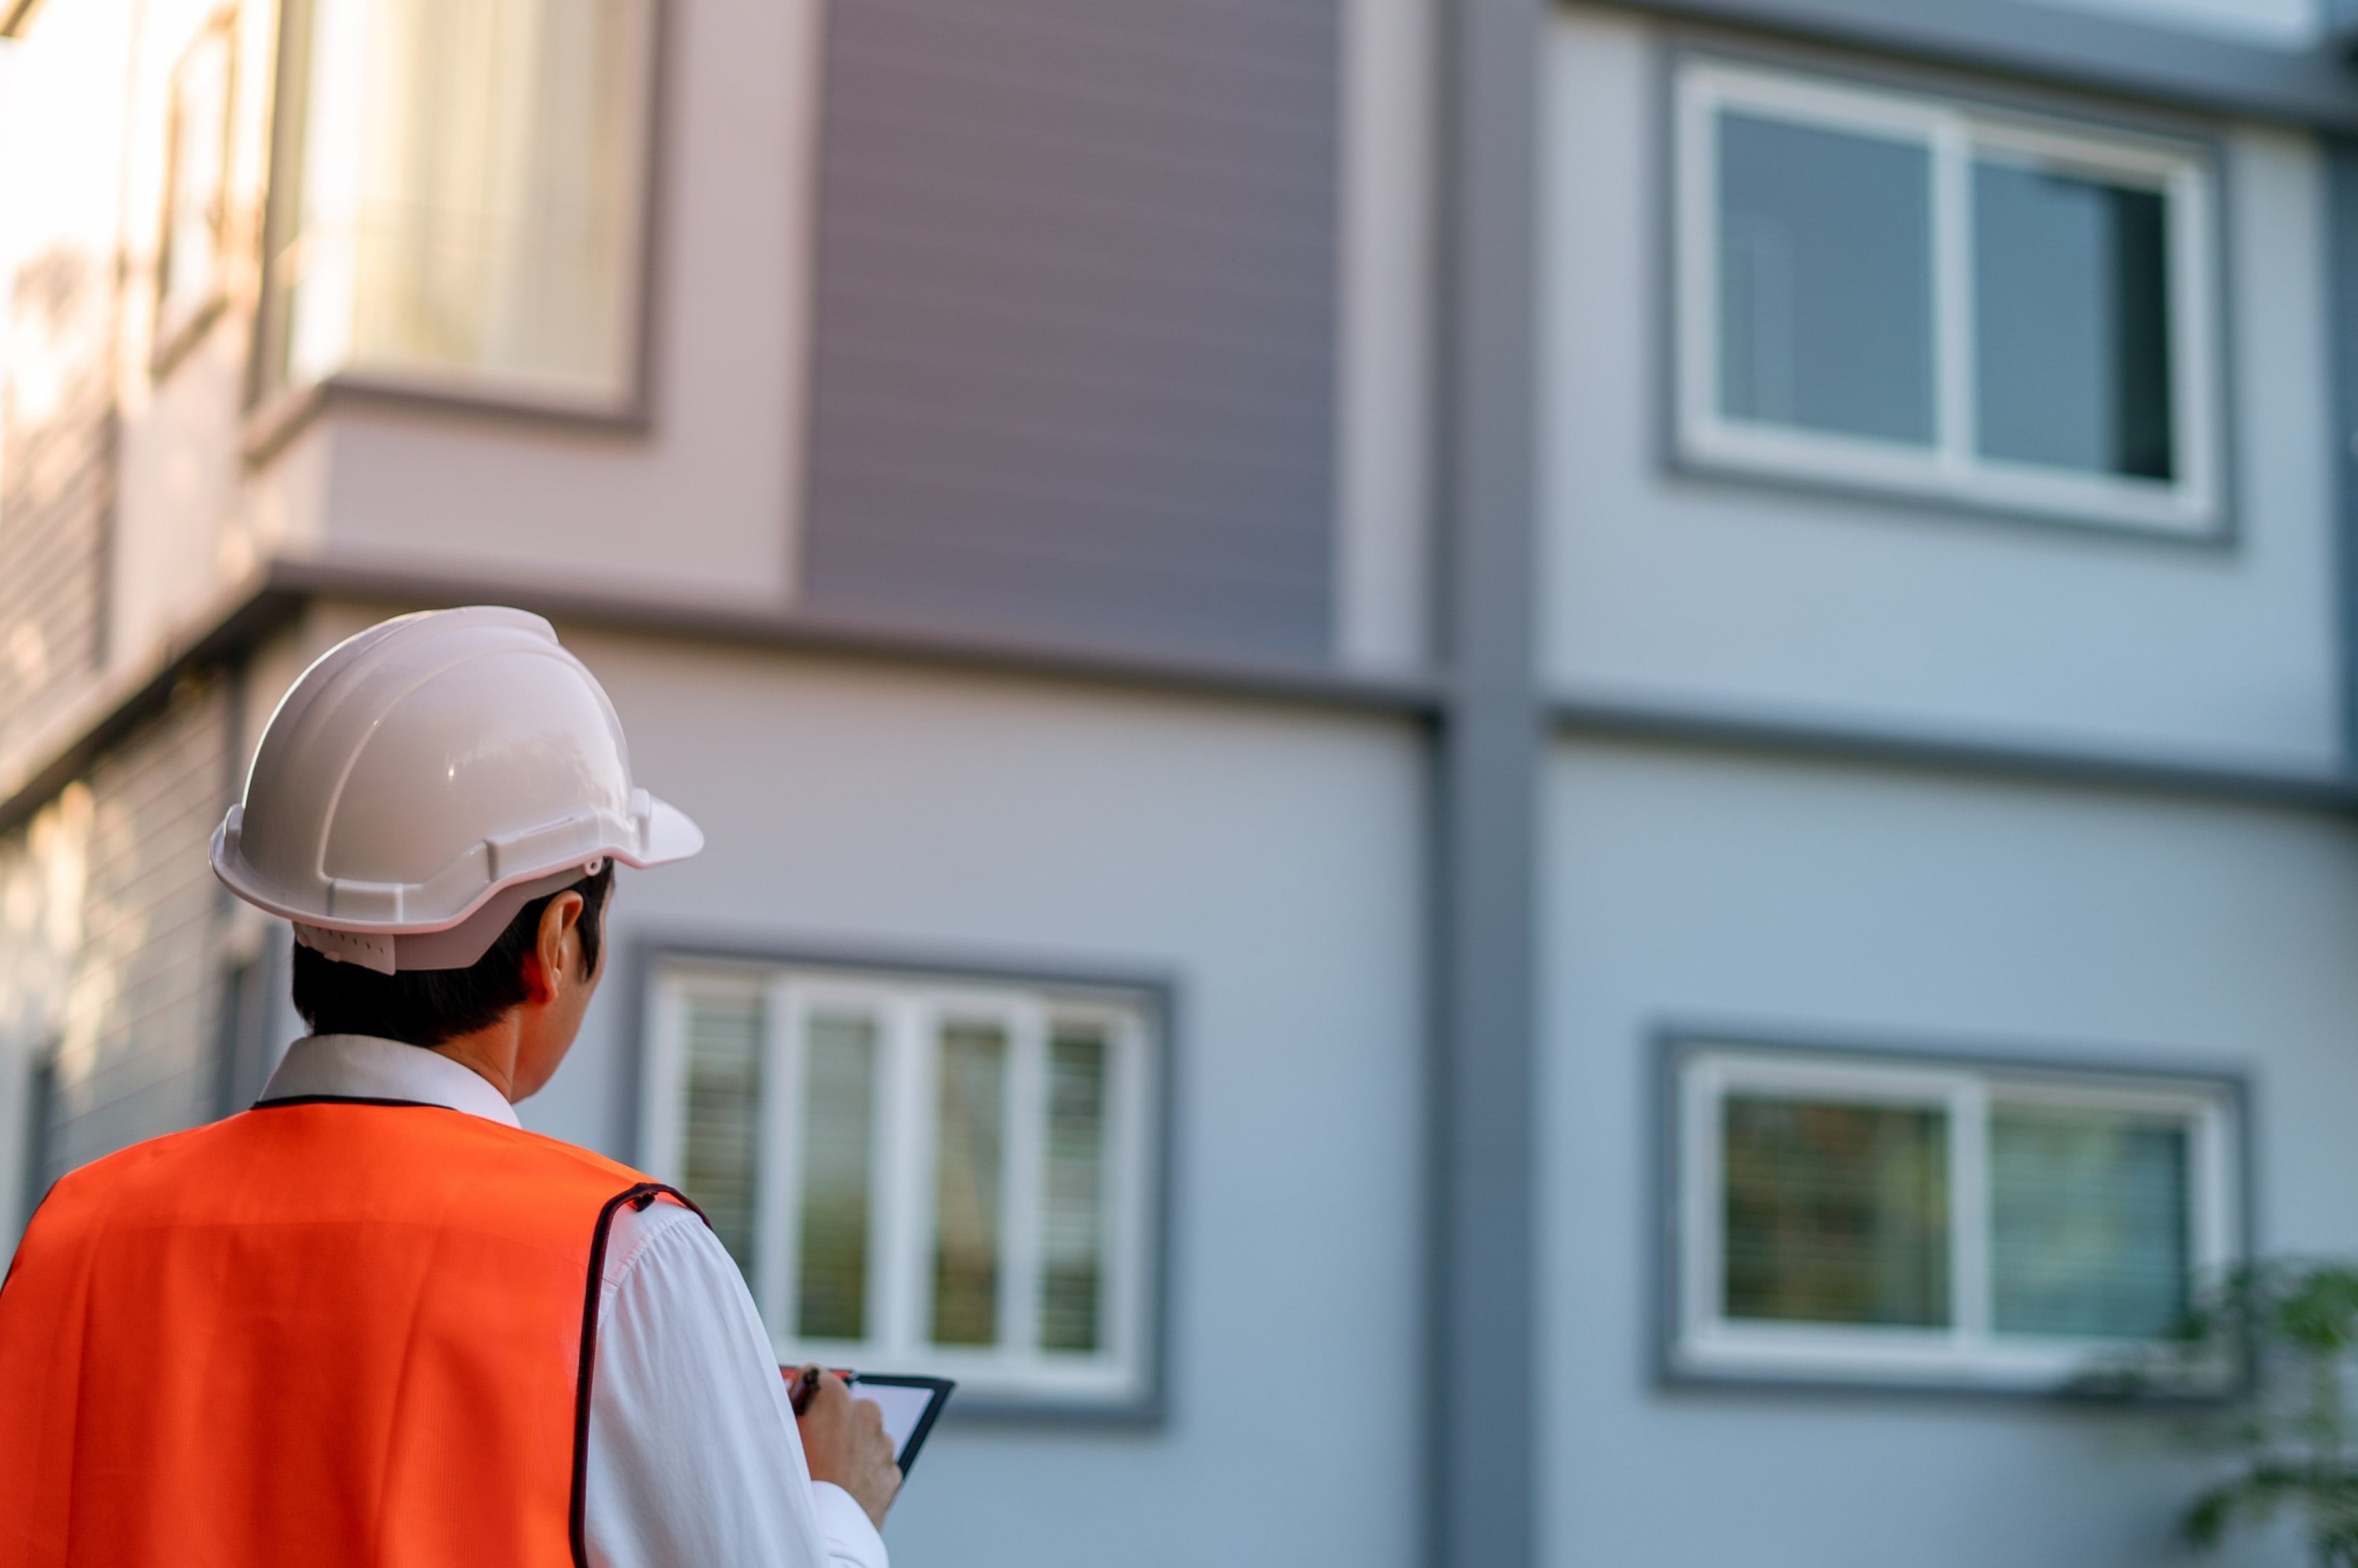 Homes are complex structures, with a vast array of systems and components. Integrating high technology into inspections can assist a certified inspector in thoroughness and accuracy.